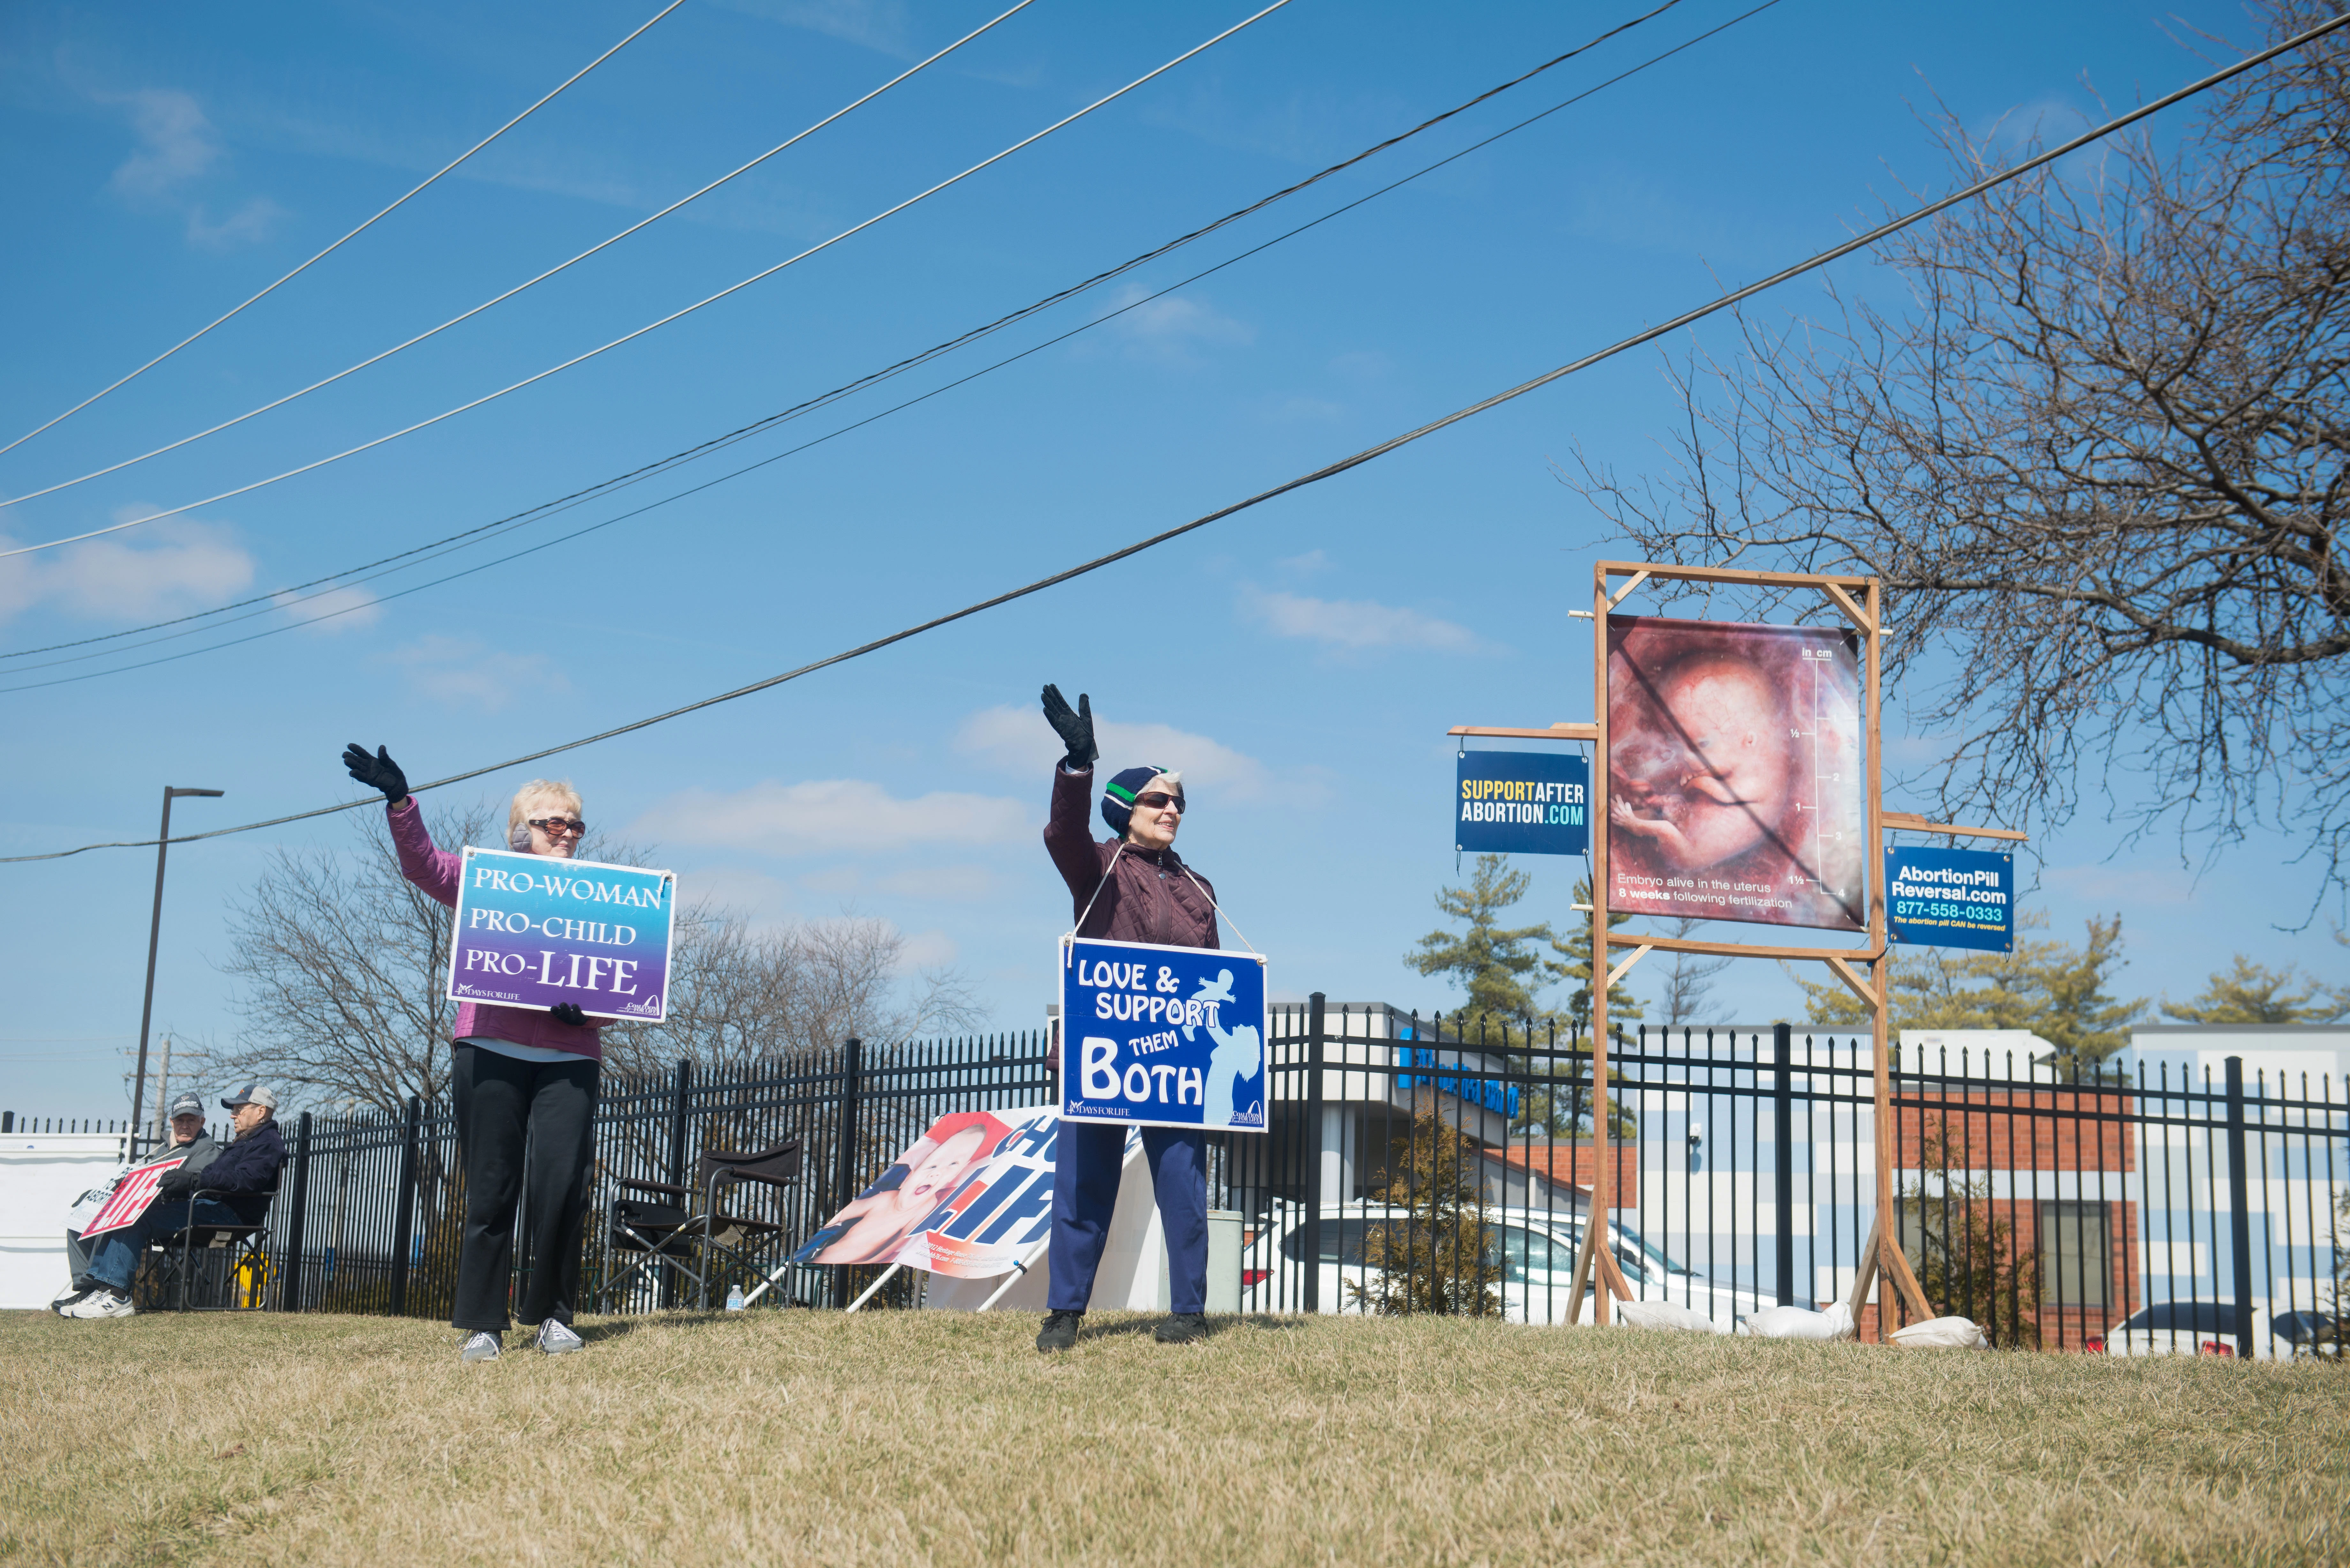 40 Days for Life protestors wave at passing cars outside the  Planned Parenthood clinic in Fairview Heights, Ill., on Tuesday, March 8, 2022.  40 Days for Life is a religious anti-abortion movement that holds protests and prayer vigils outside abortion clinics across the US during Lent. (Photo by Neeta Satam for The Washington Post via Getty Images)